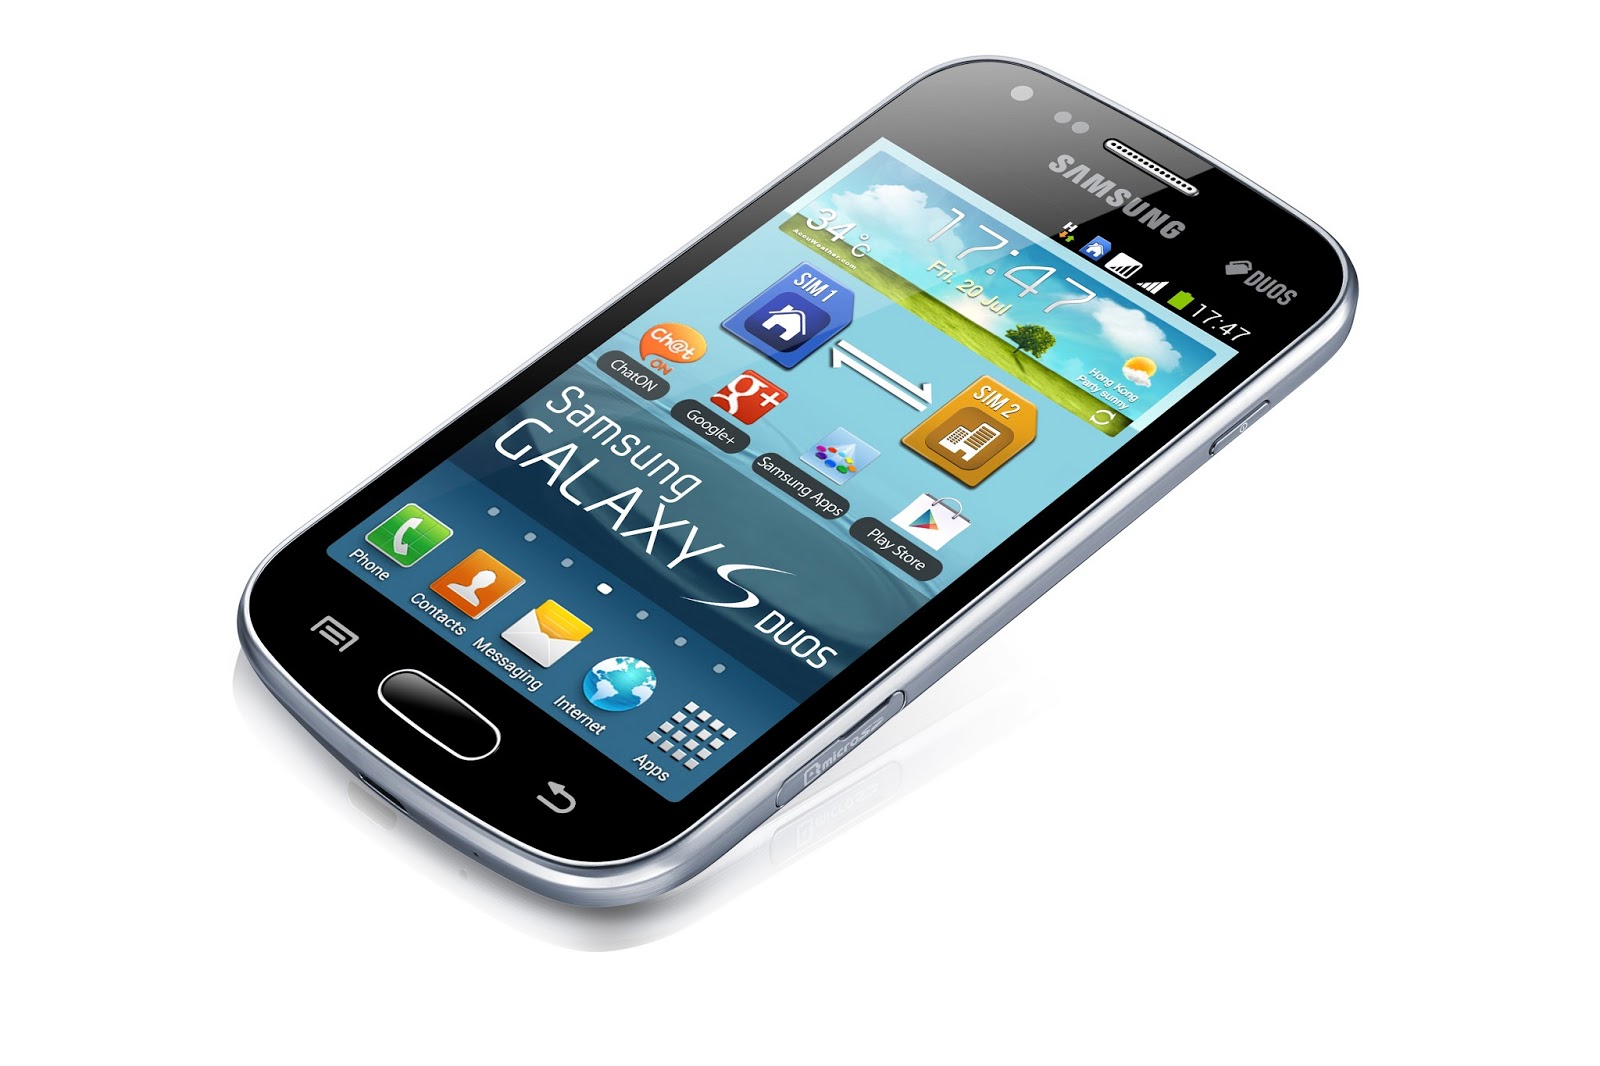 samsung duos wallpaper,mobile phone,gadget,communication device,portable communications device,smartphone